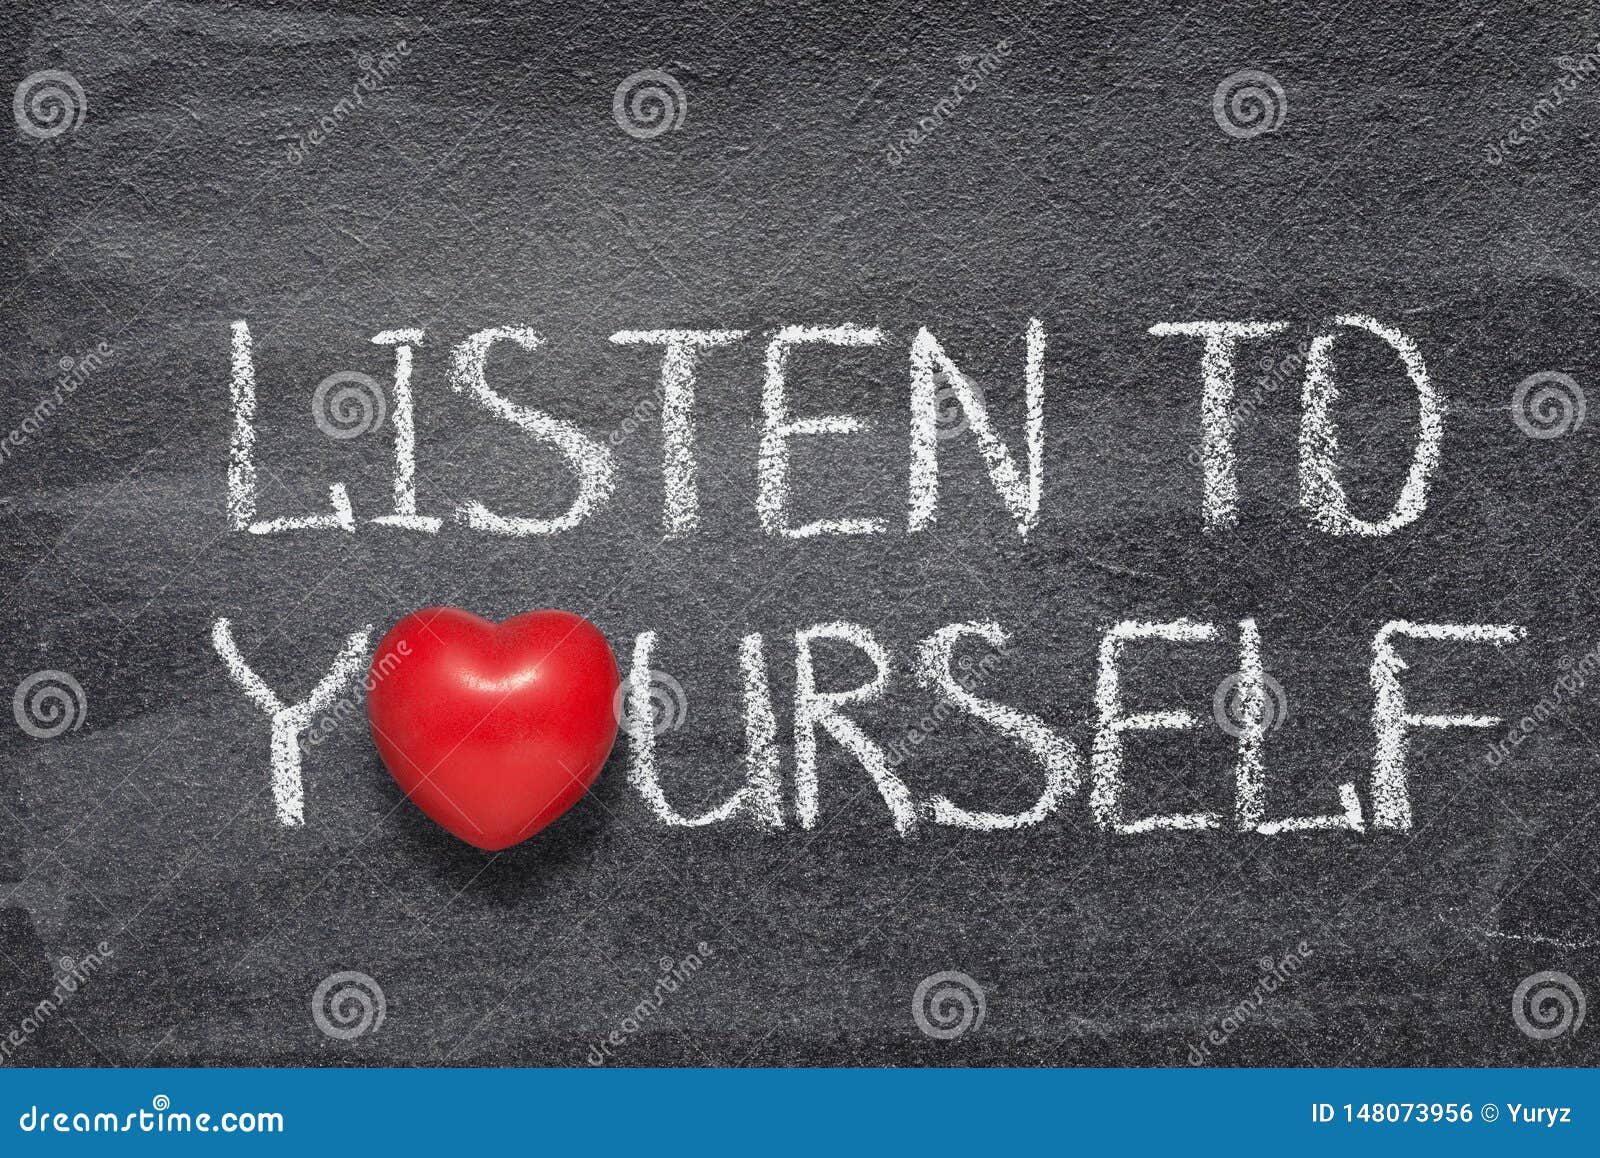 listen to yourself heart